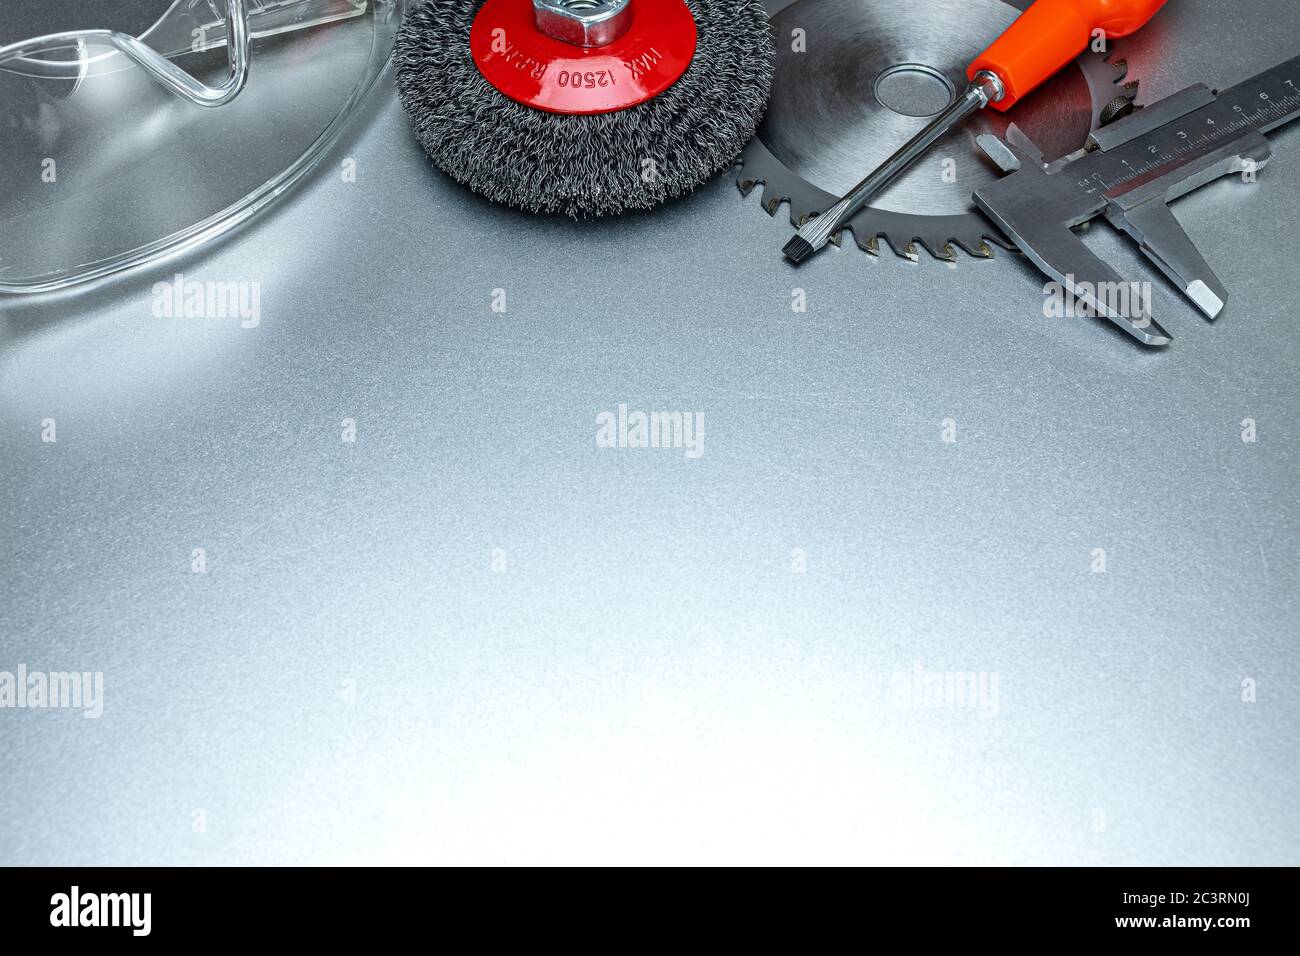 red abrasive steel brushes, circular saw blade, protective safety glasses and caliper on metal surface. tools for cleaning, polishing and cutting Stock Photo